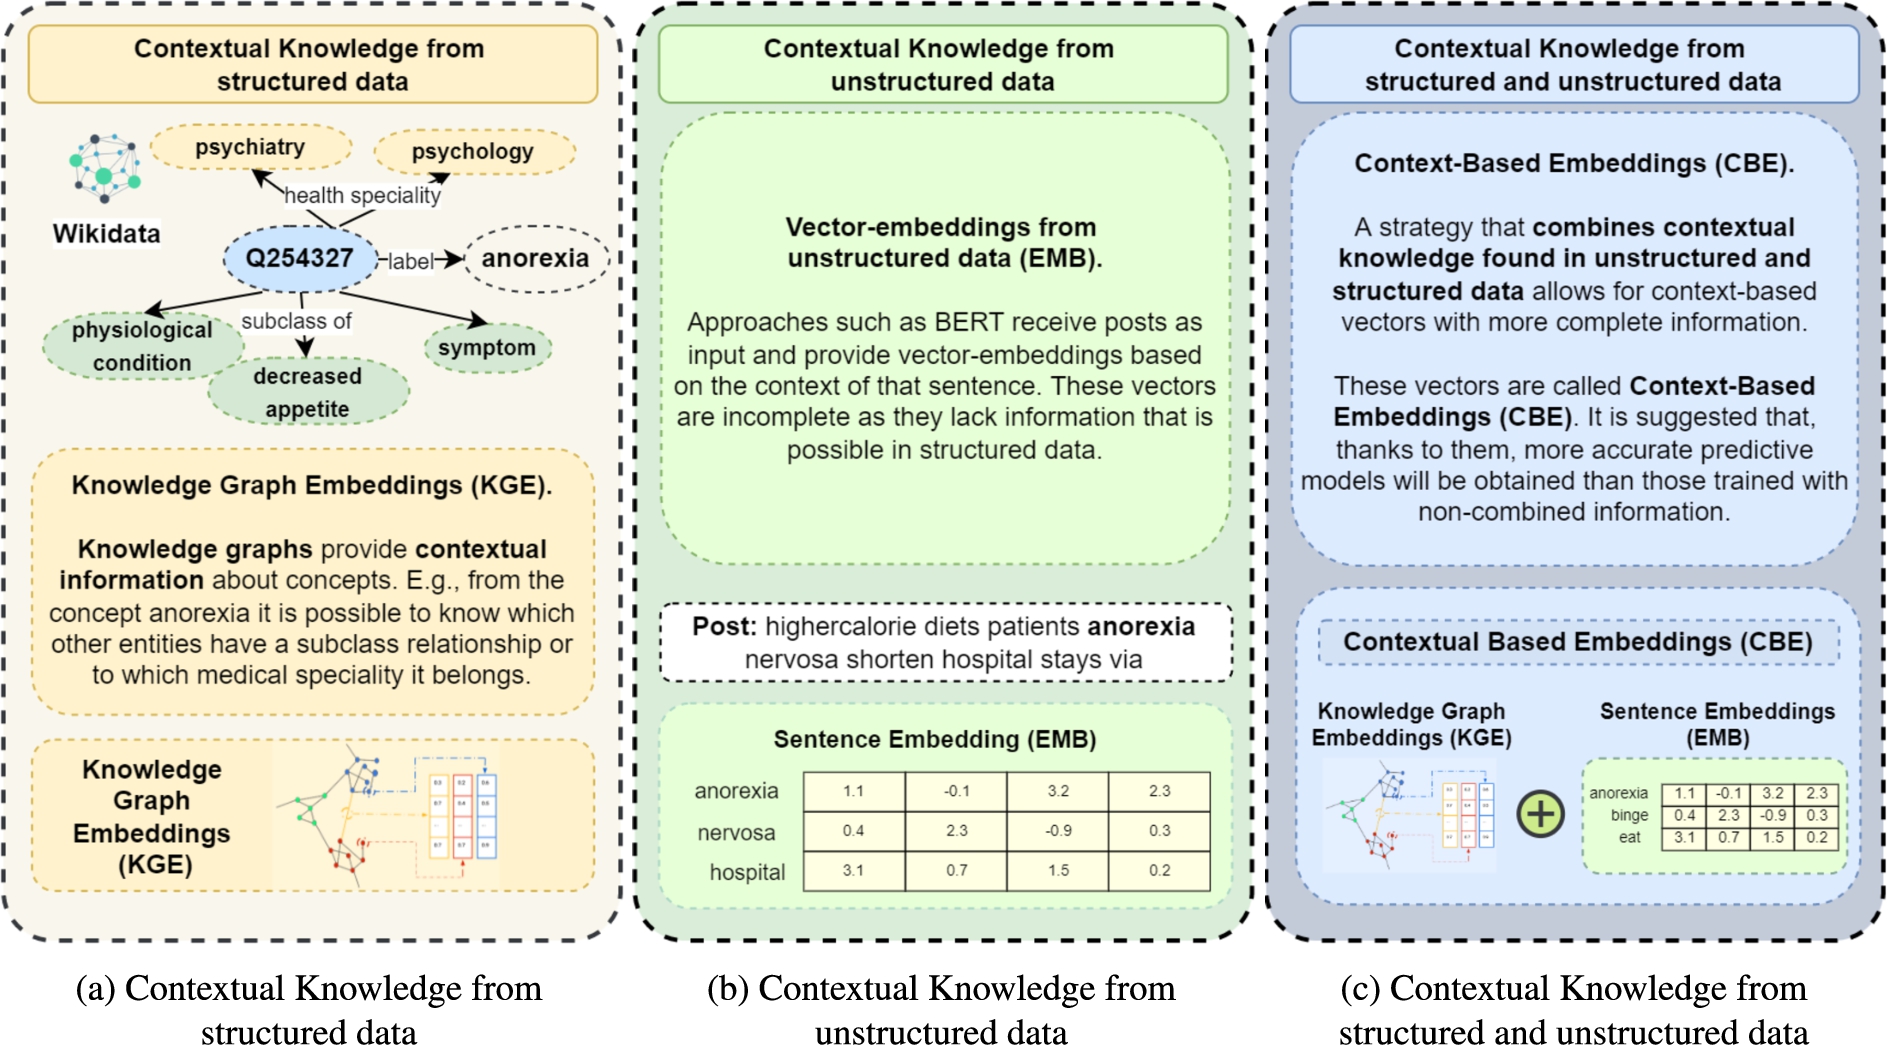 Contextual knowledge (CK). (a) CK is represented in knowledge graphs and encoded in vector embeddings KGE methods. (b) CK is extracted from unstructured data, e.g., social media posts; it corresponds to the words around a particular concept. (c) The proposed approach, CK extracted from both structured and unstructured data and encoded in context-based embeddings (CBE).